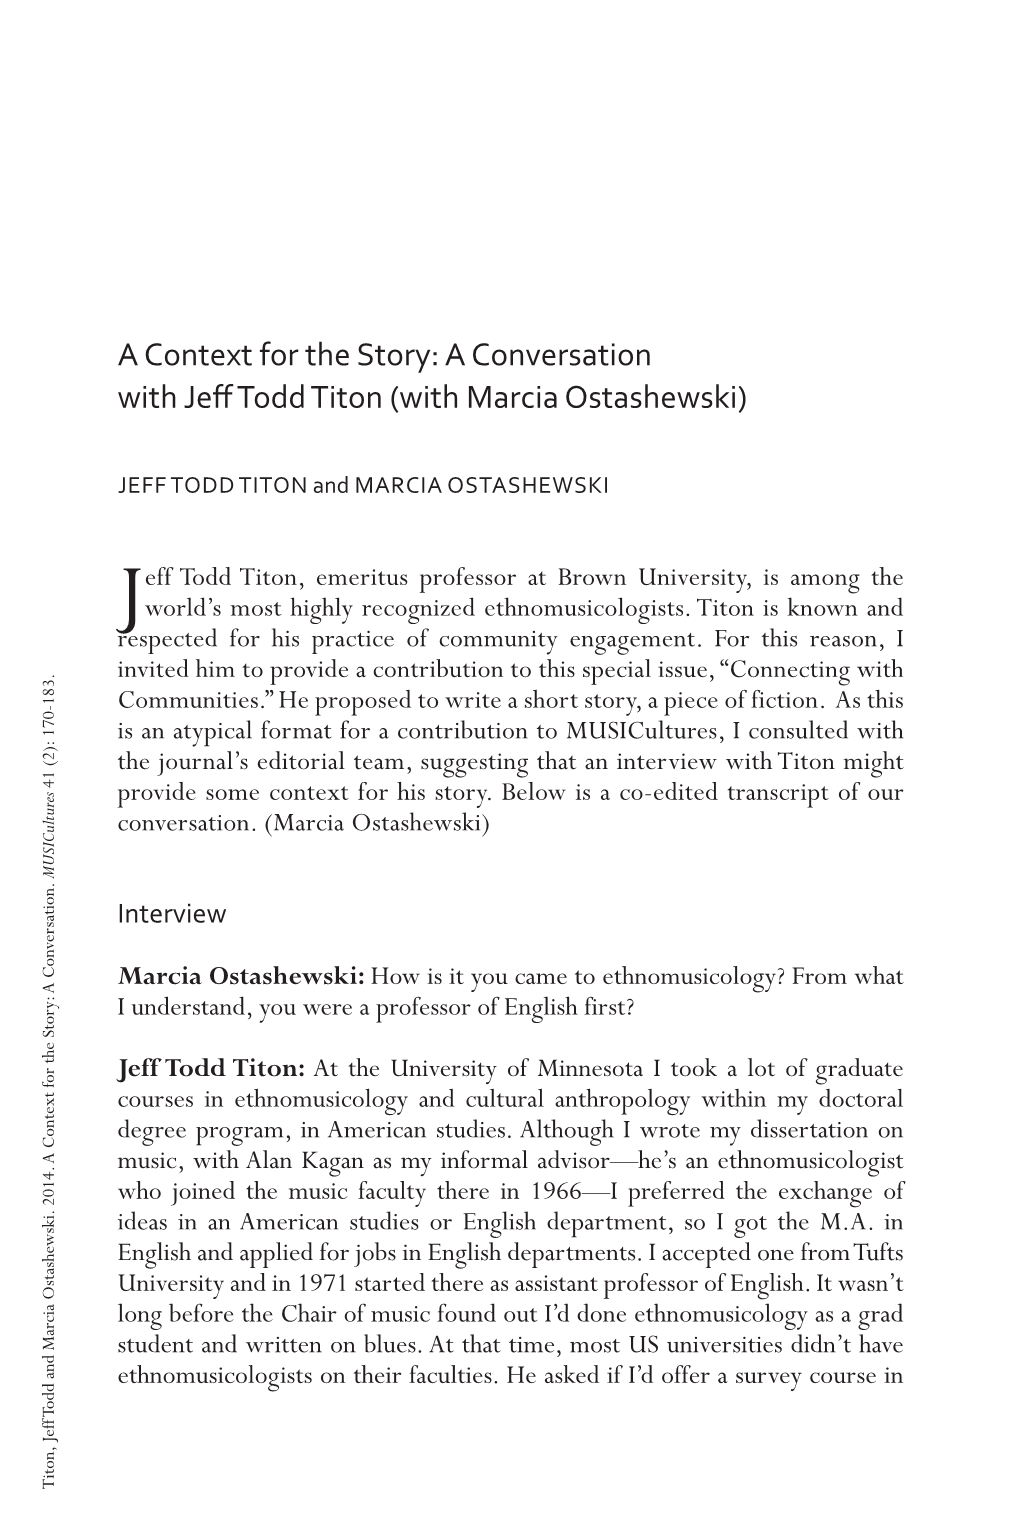 A Context for the Story: a Conversation with Jeff Todd Titon (With Marcia Ostashewski)